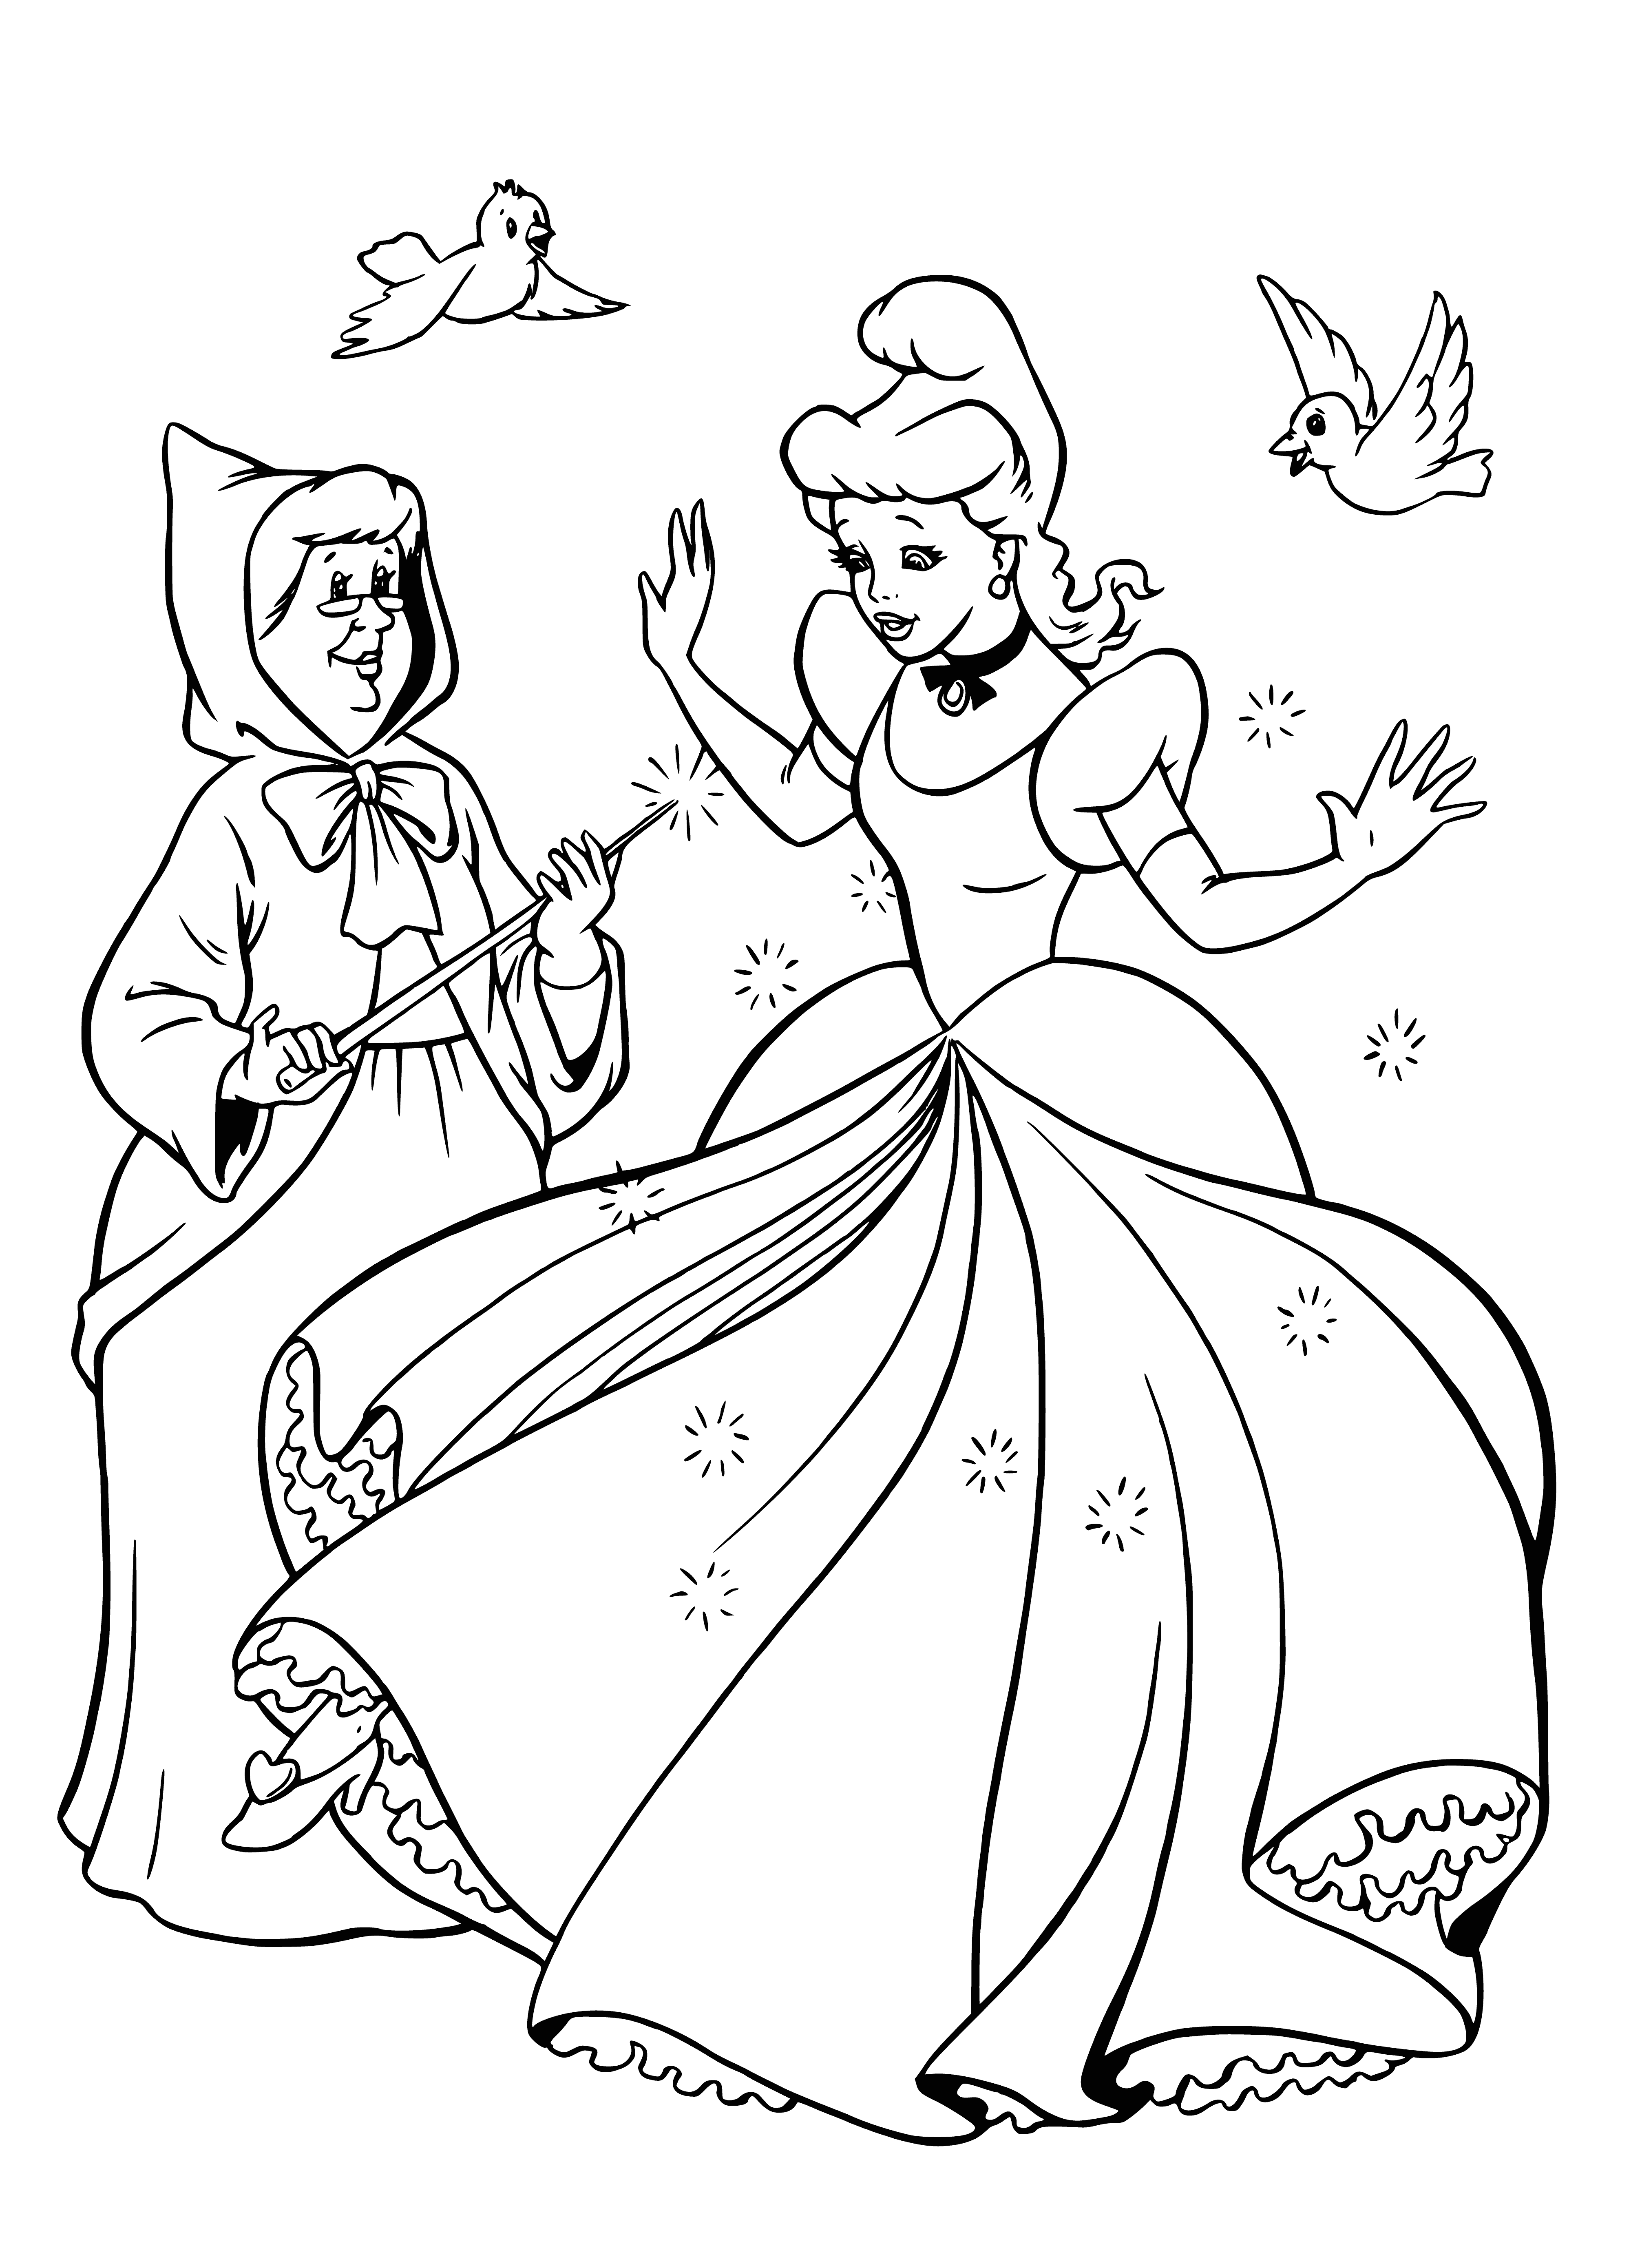 New dress coloring page